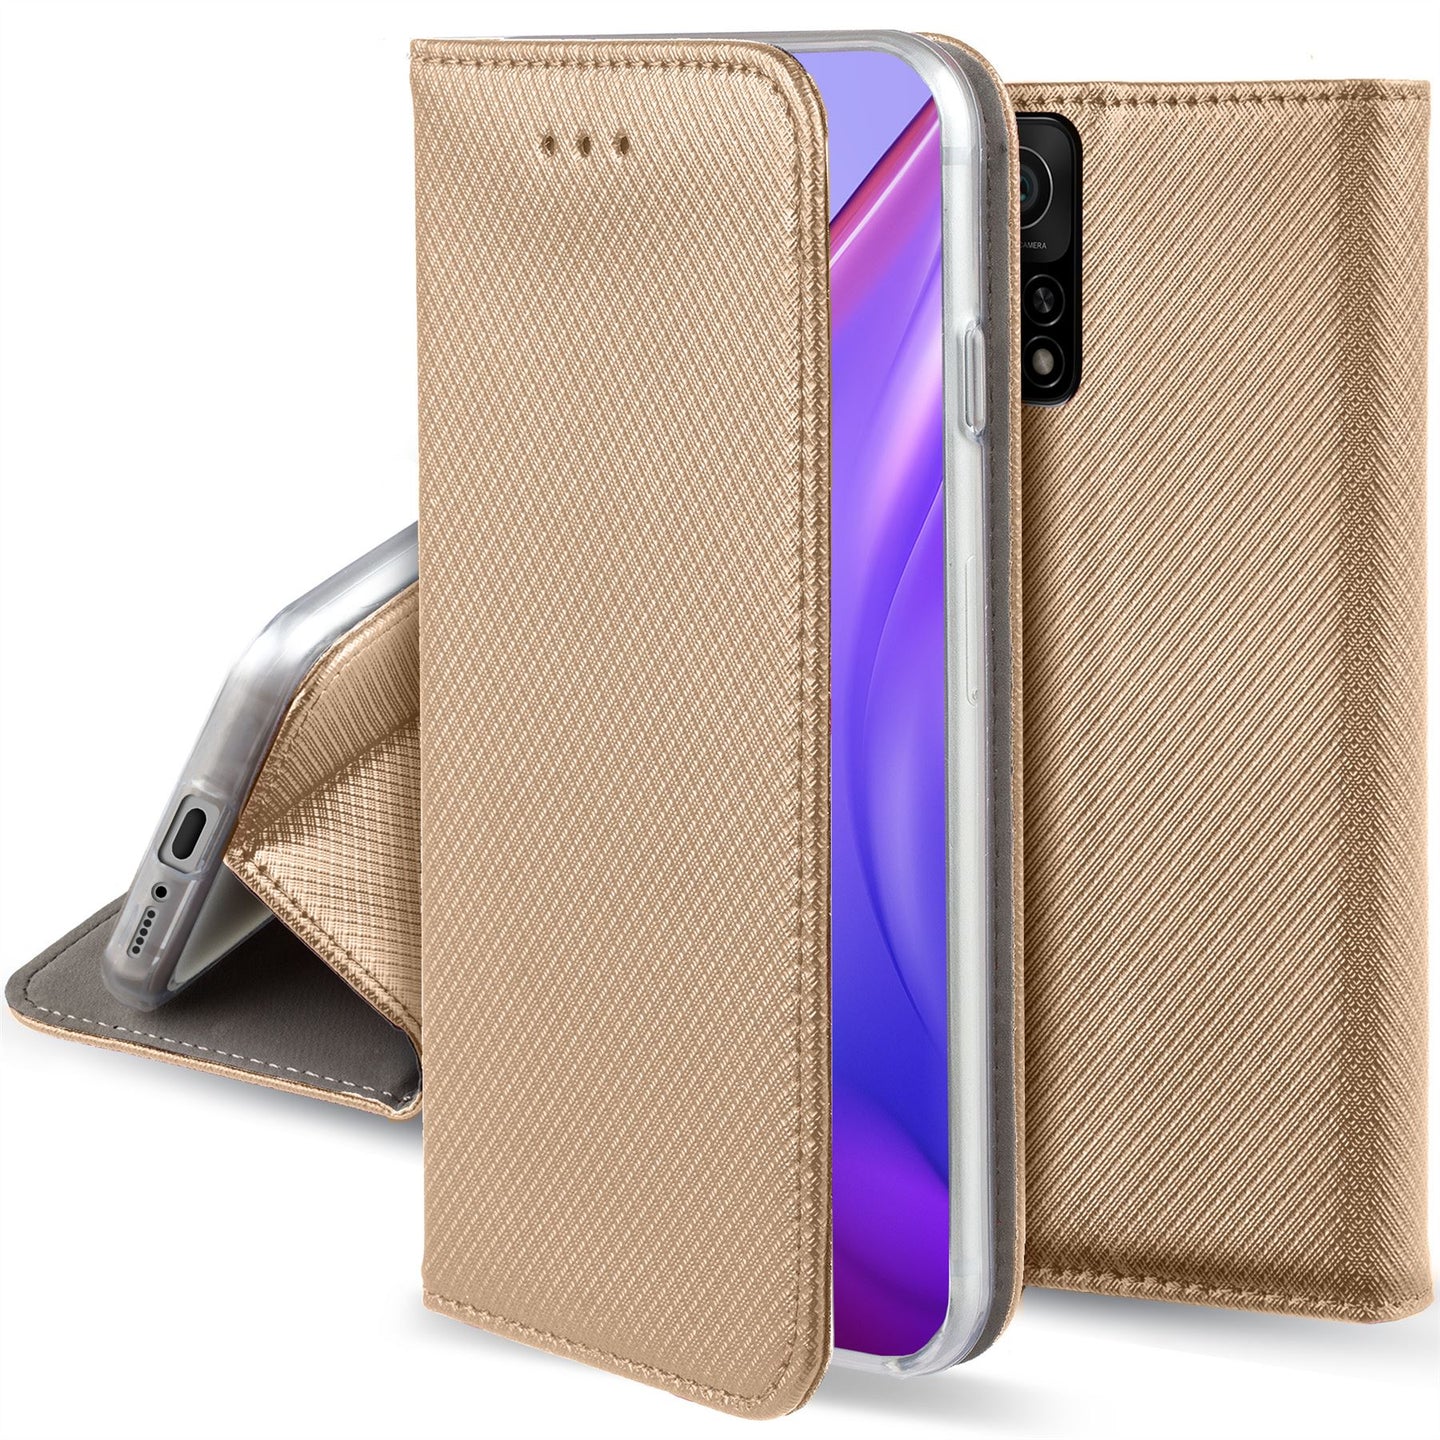 Moozy Case Flip Cover for Xiaomi Mi 10T 5G and Mi 10T Pro 5G, Gold - Smart Magnetic Flip Case with Card Holder and Stand